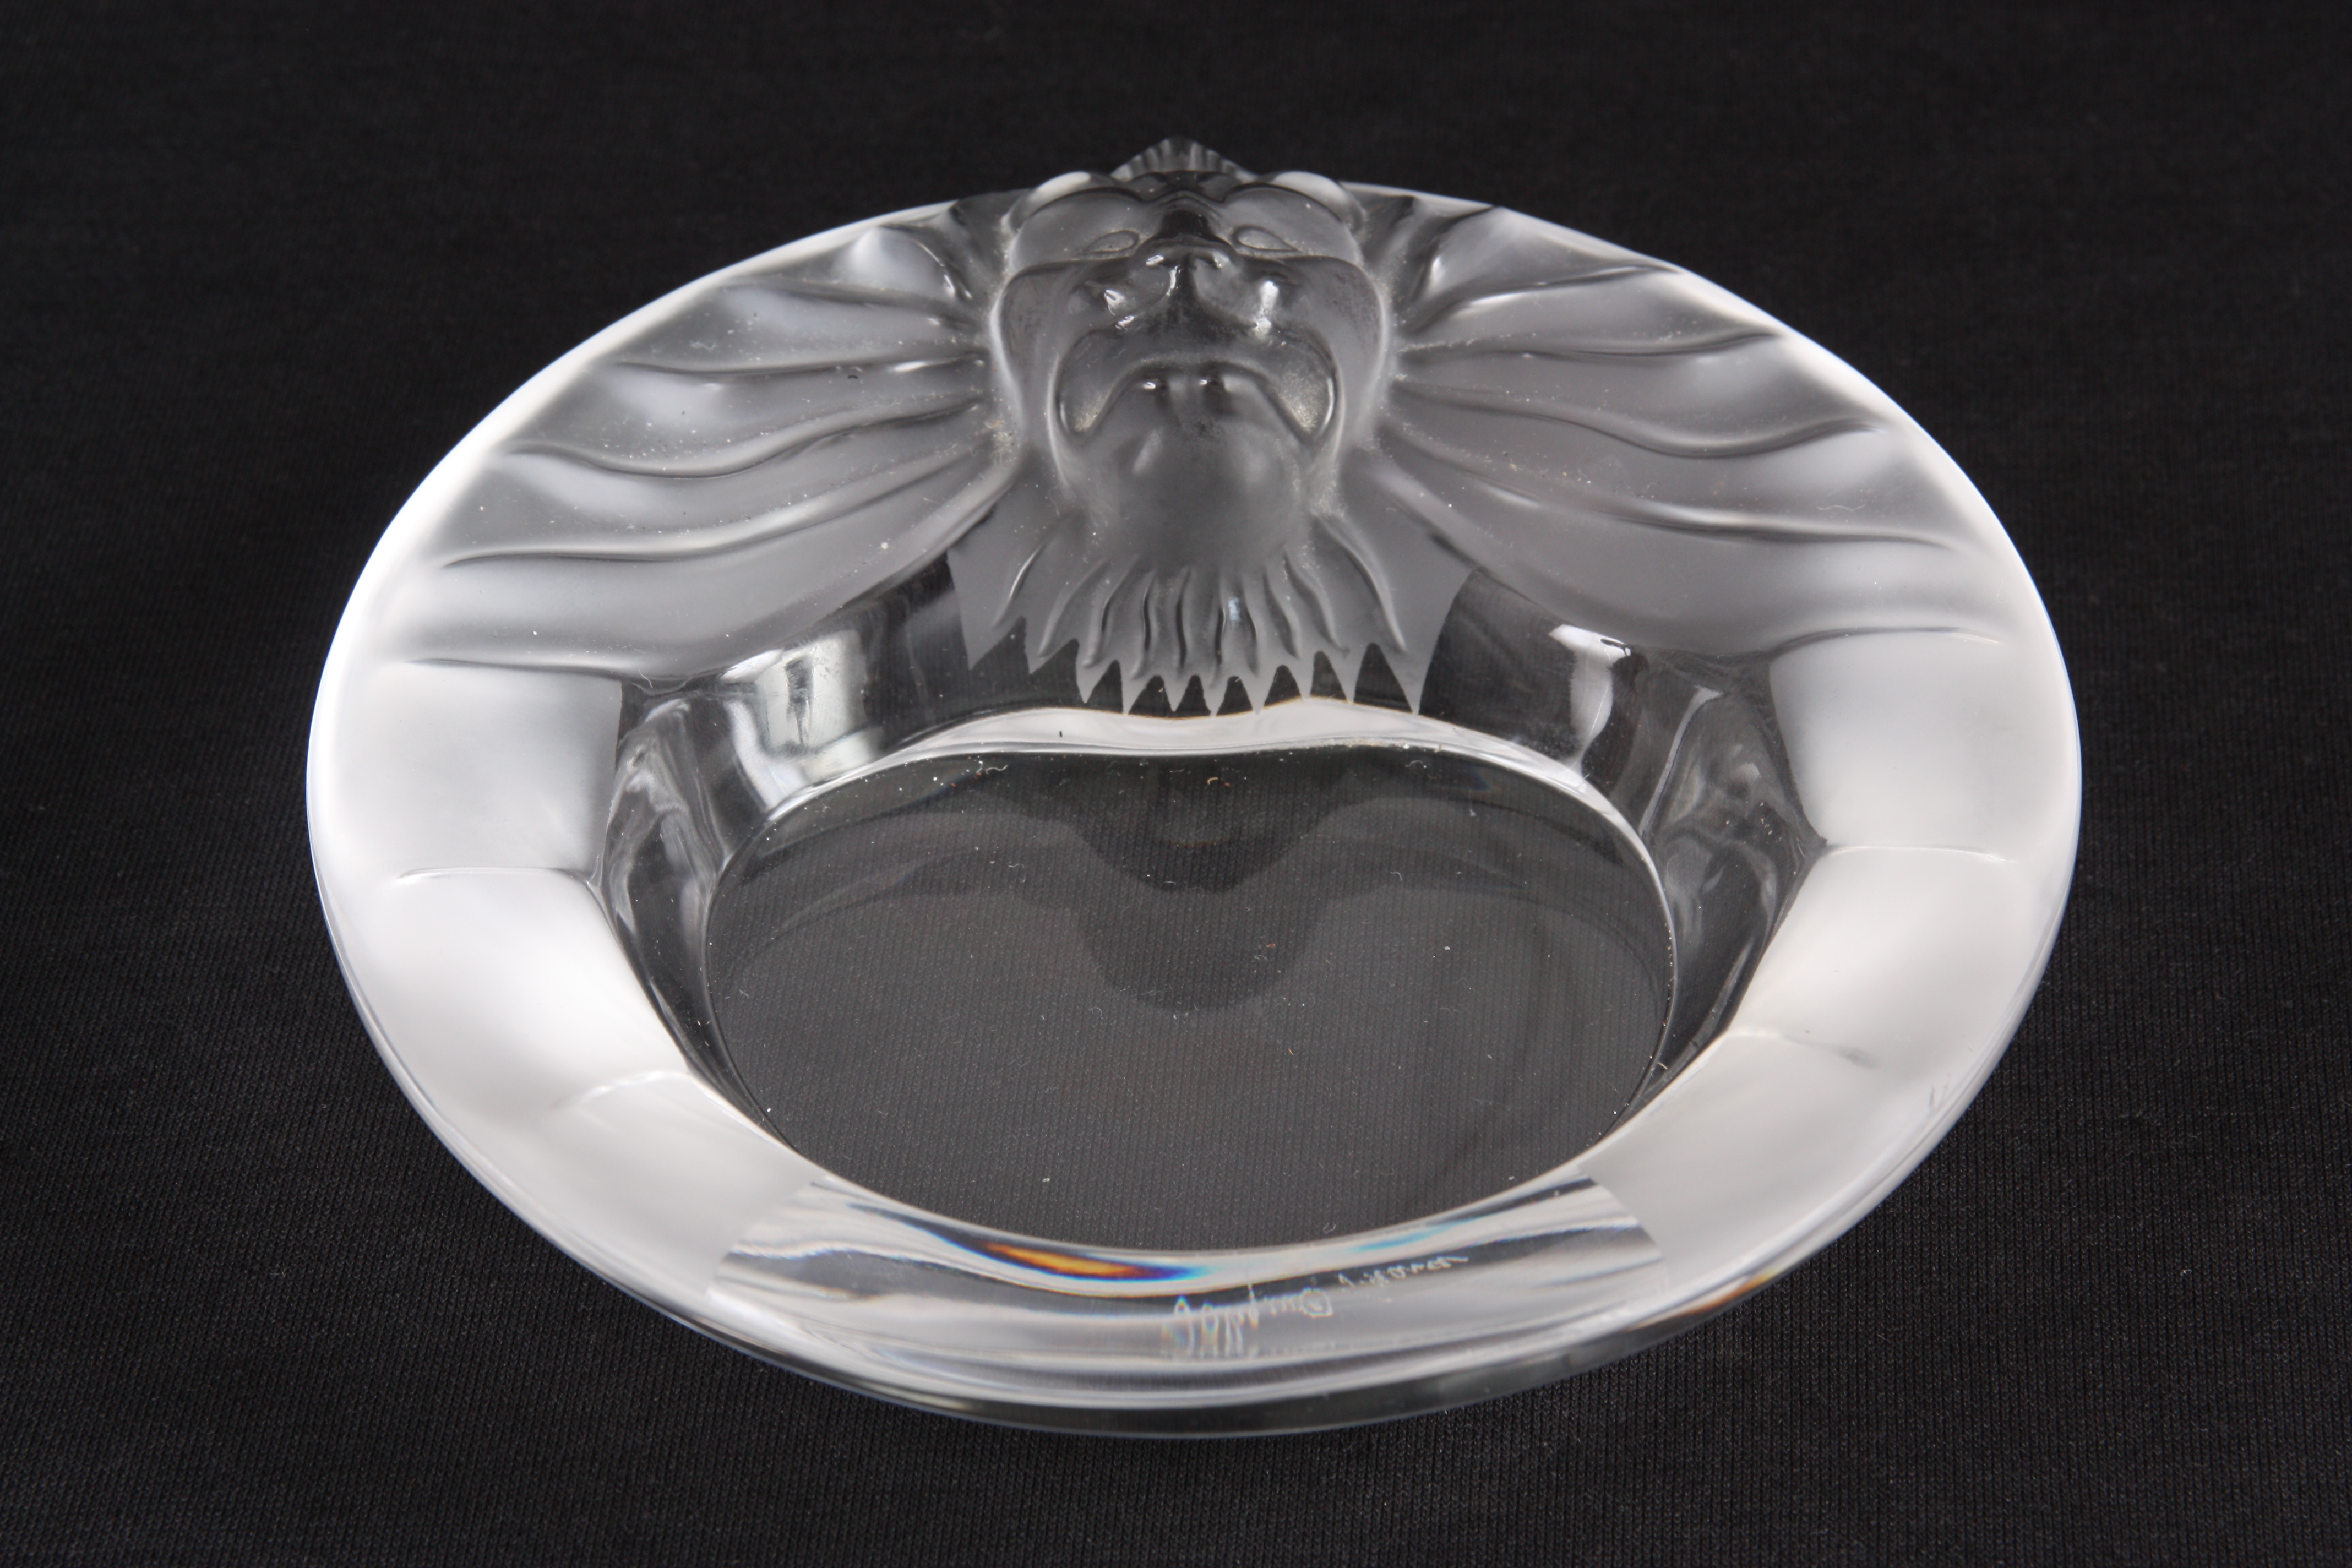 A LALIQUE LIONS HEAD GLASS CIRCULAR PIN TRAY signed Lalique France 14.5cm diameter. - Image 4 of 6